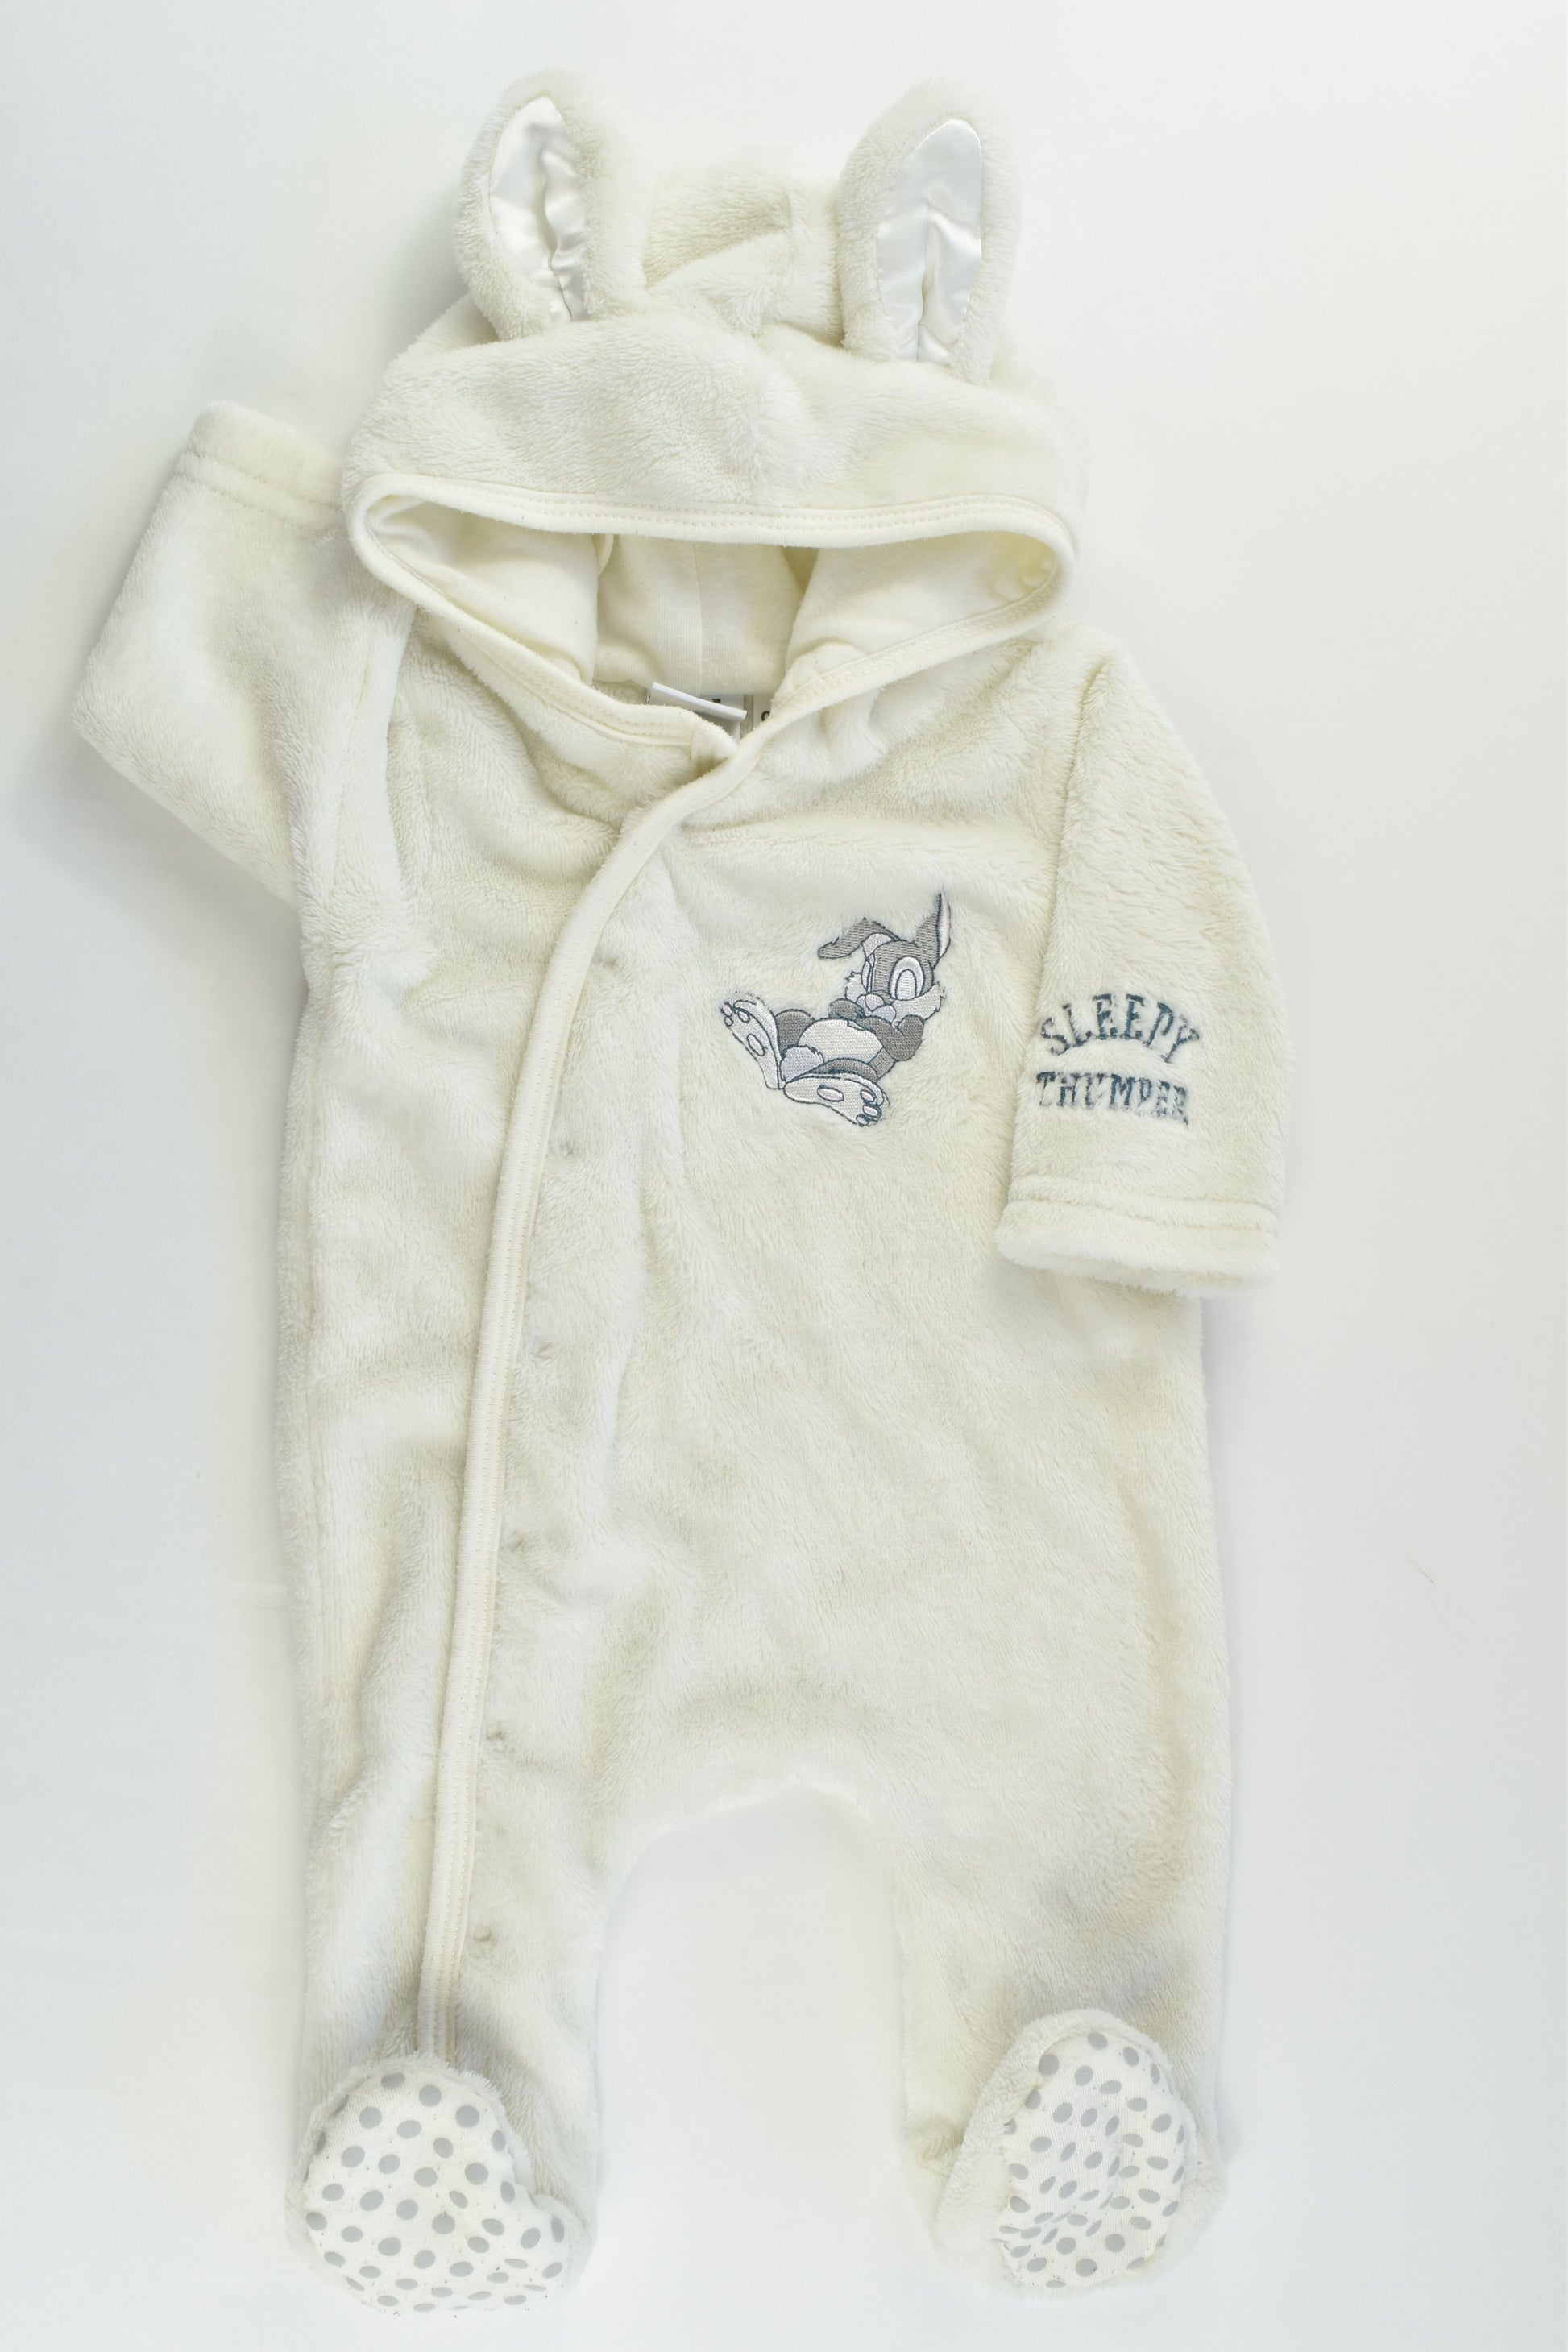 Disney Baby by Target Size 000 (0-3 months) 'Sleepy Thumper' Pramsuit